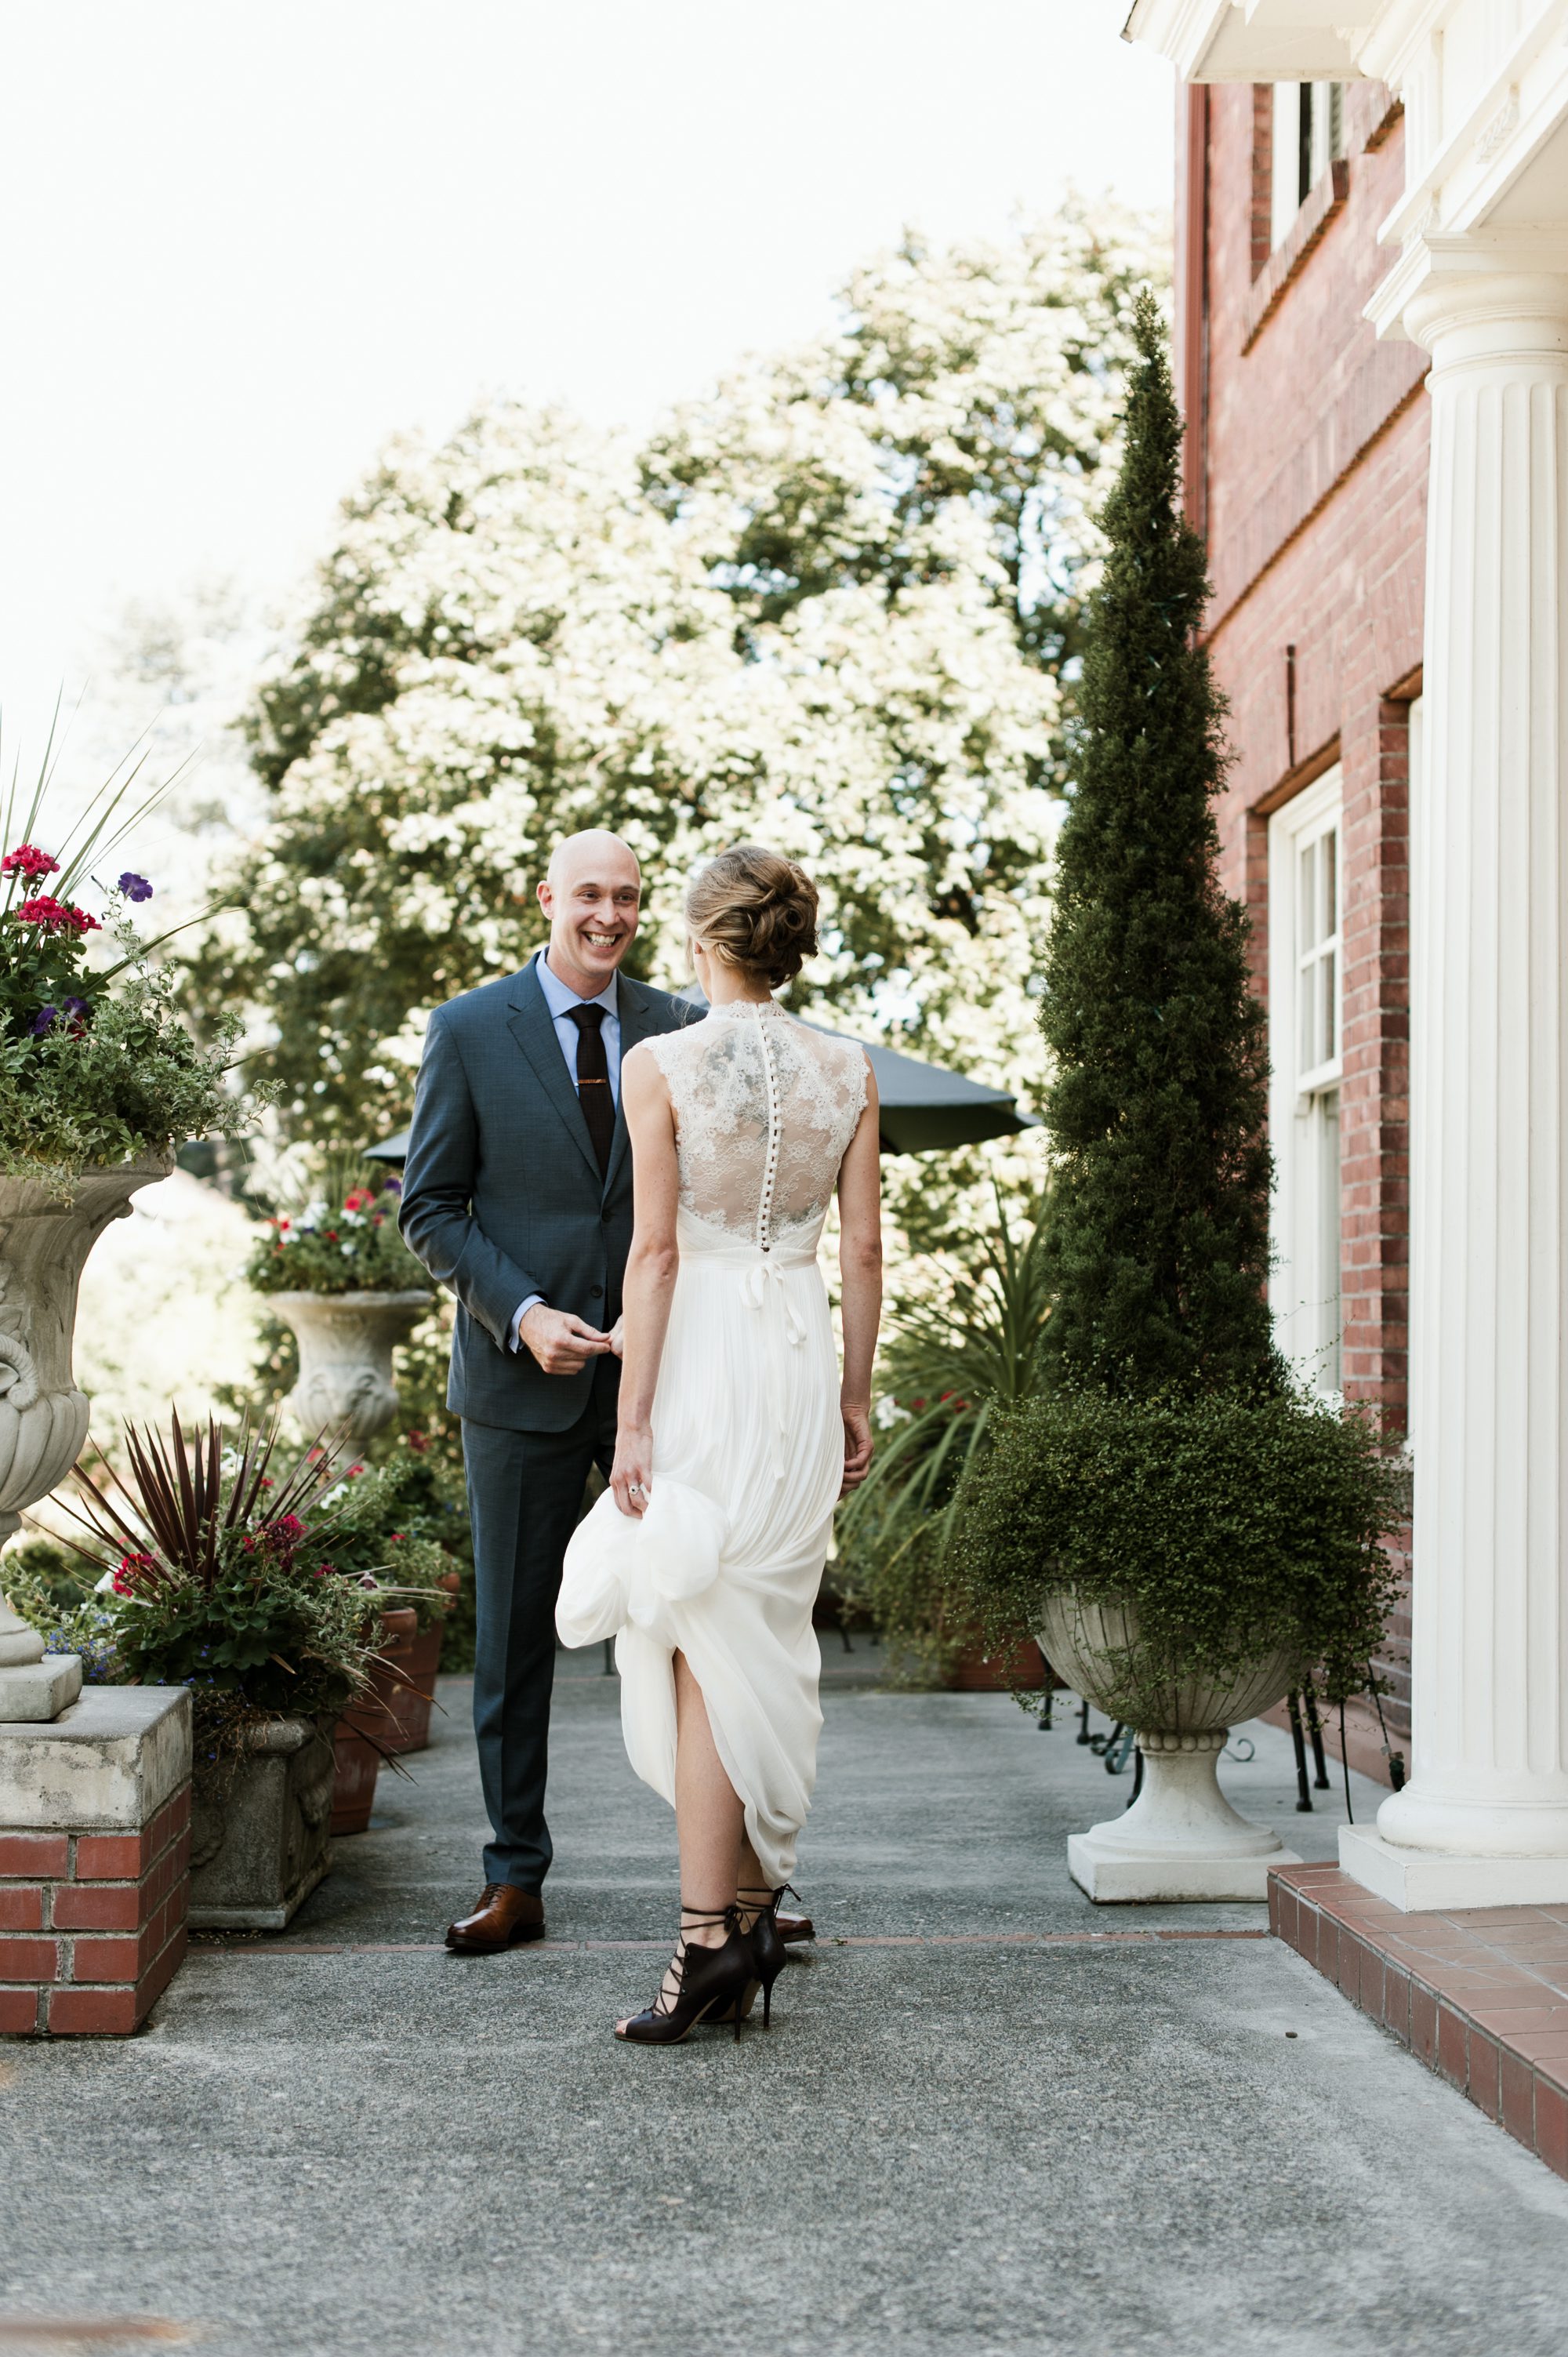 The bride and groom have their first look at the Portland Mayor's Mansion. By Laurelhurst Park wedding photographer Briana Morrison